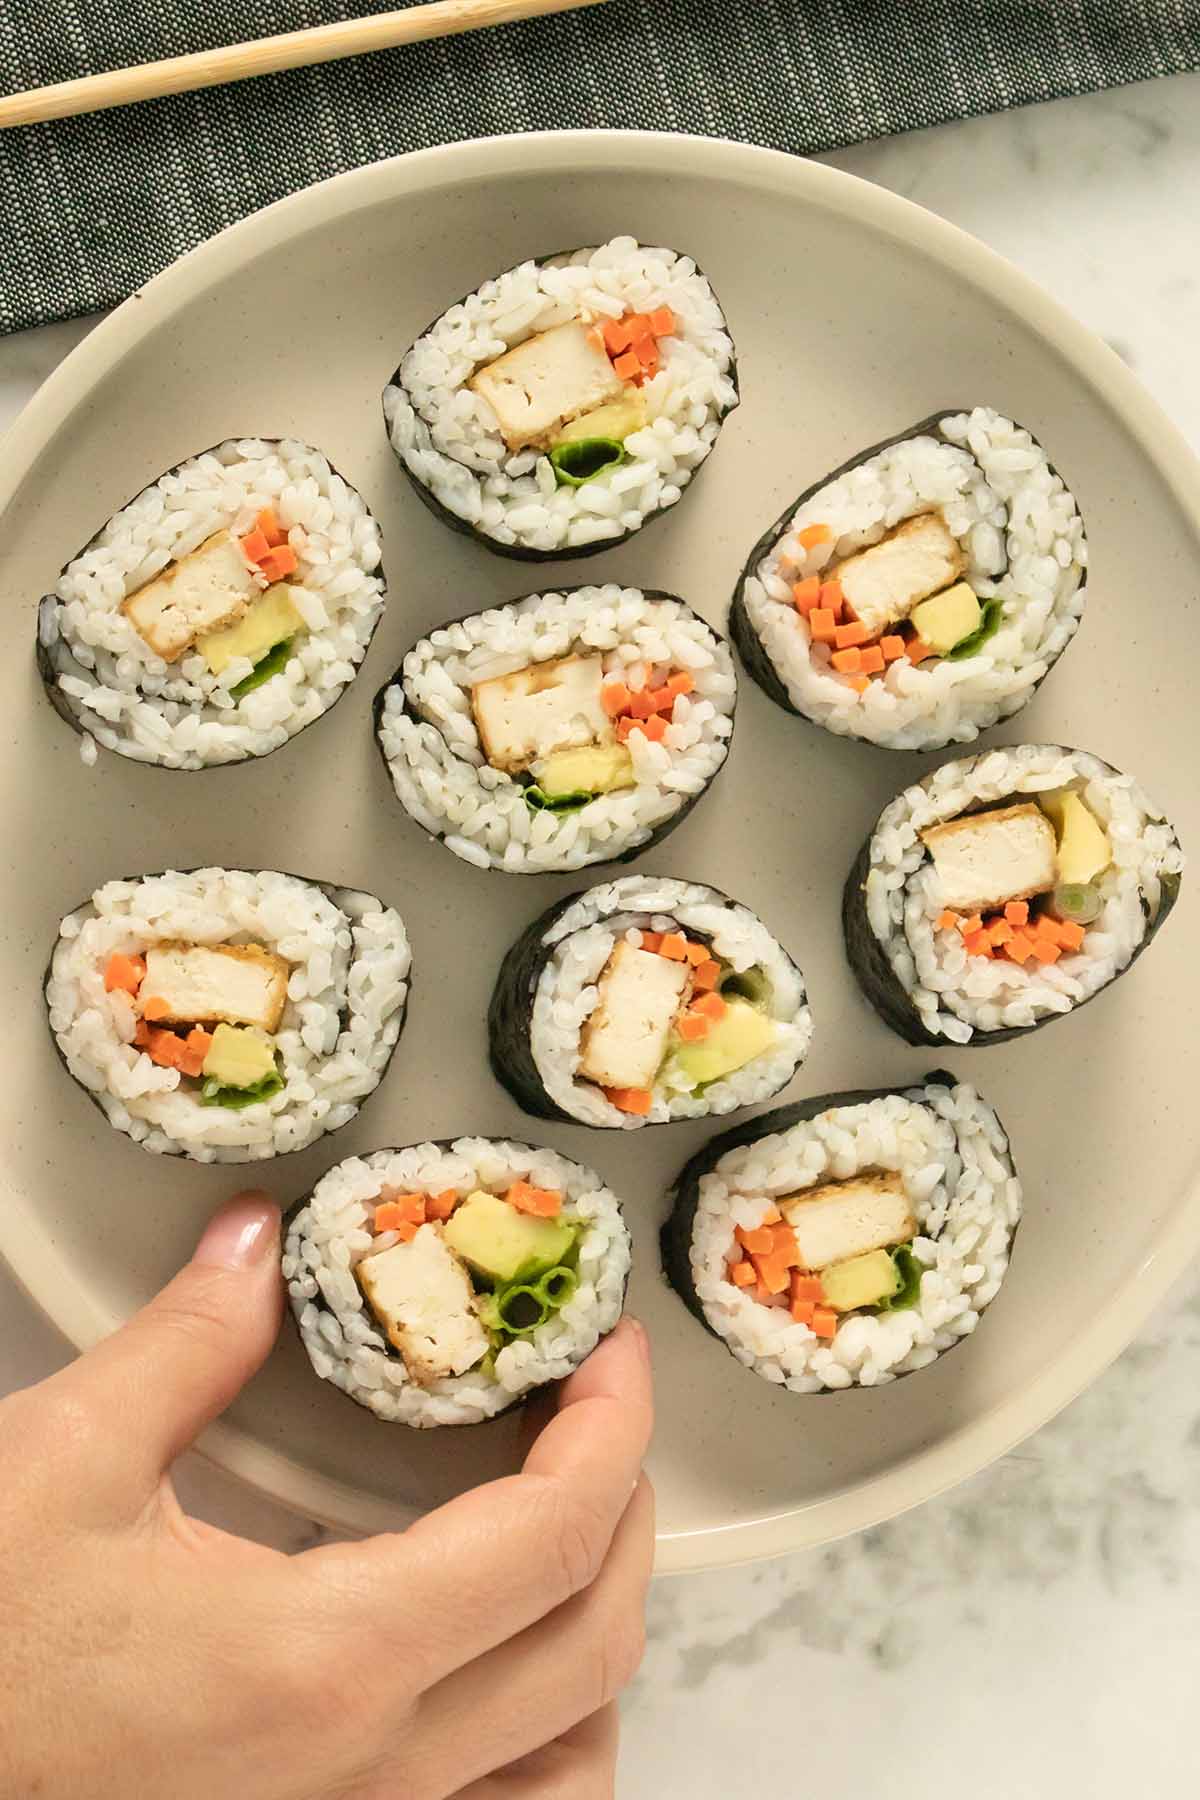 plate of tofu sushi rolls with avocado and pickled carrots